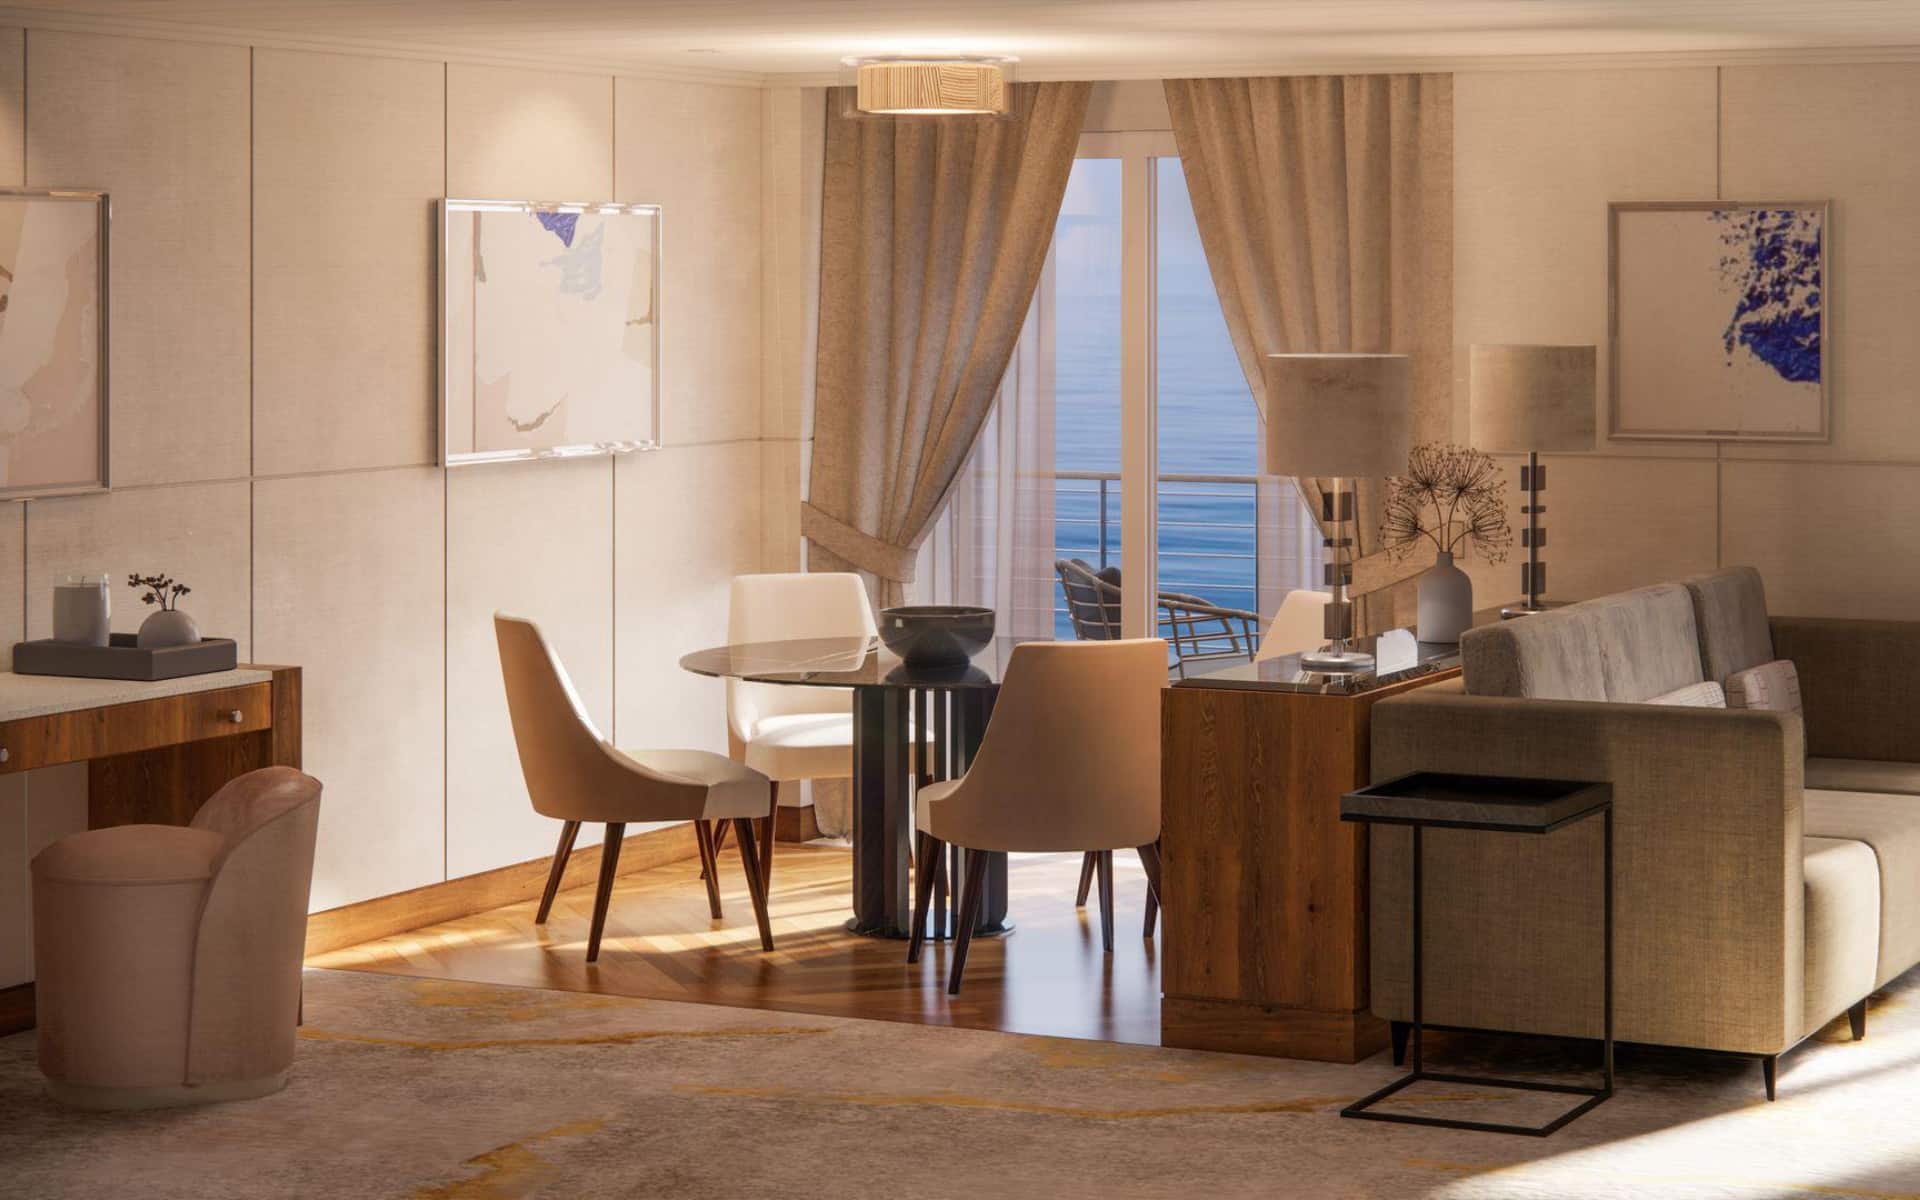 the Junior Crystal Penthouse Suite is one of the new Crystal Cruises suite categories.